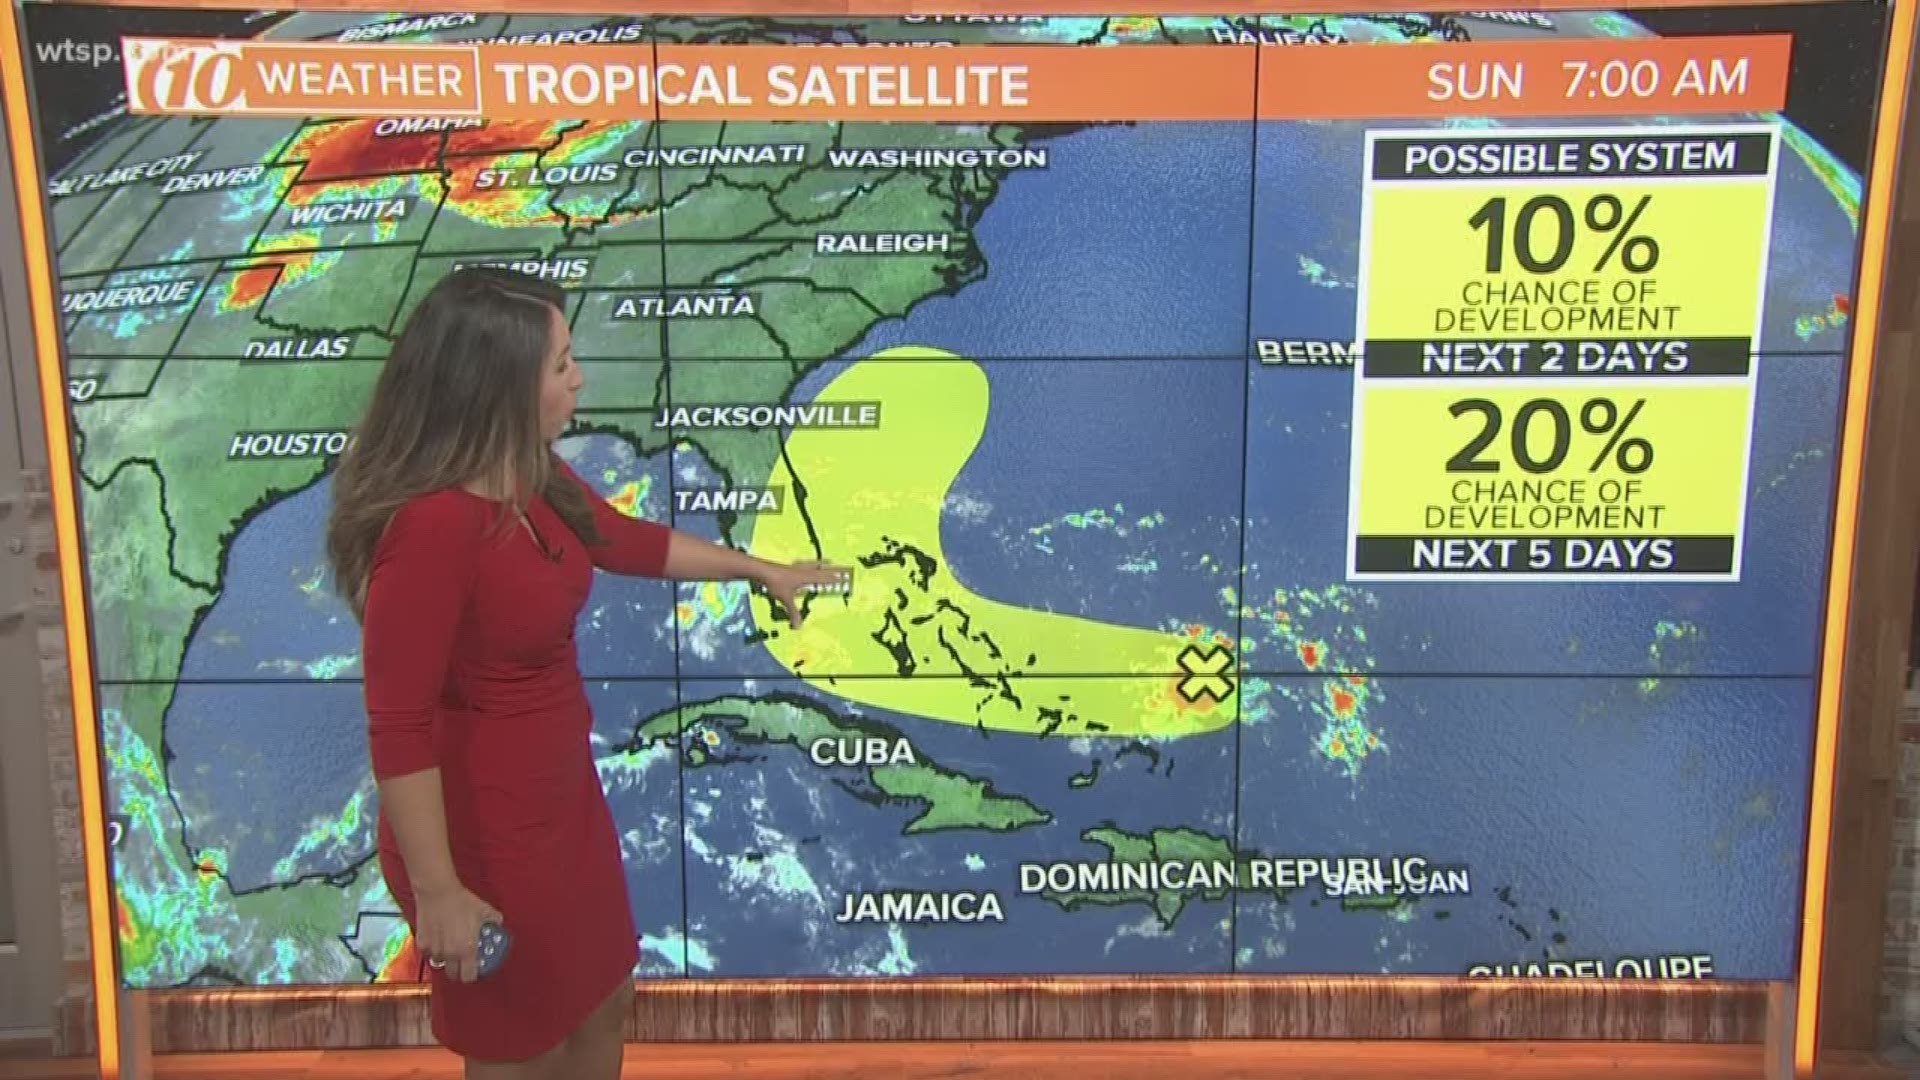 A tropical wave bubbling east of the Bahamas could develop into a cyclone during the next several days.

Although disorganized now, the National Hurricane Center says this area of disturbed weather located about 300 miles east of the central Bahamas has a 10-percent chance of developing during the next two days and a 20-percent chance into the next five days. It is moving west at about 10-15 mph.